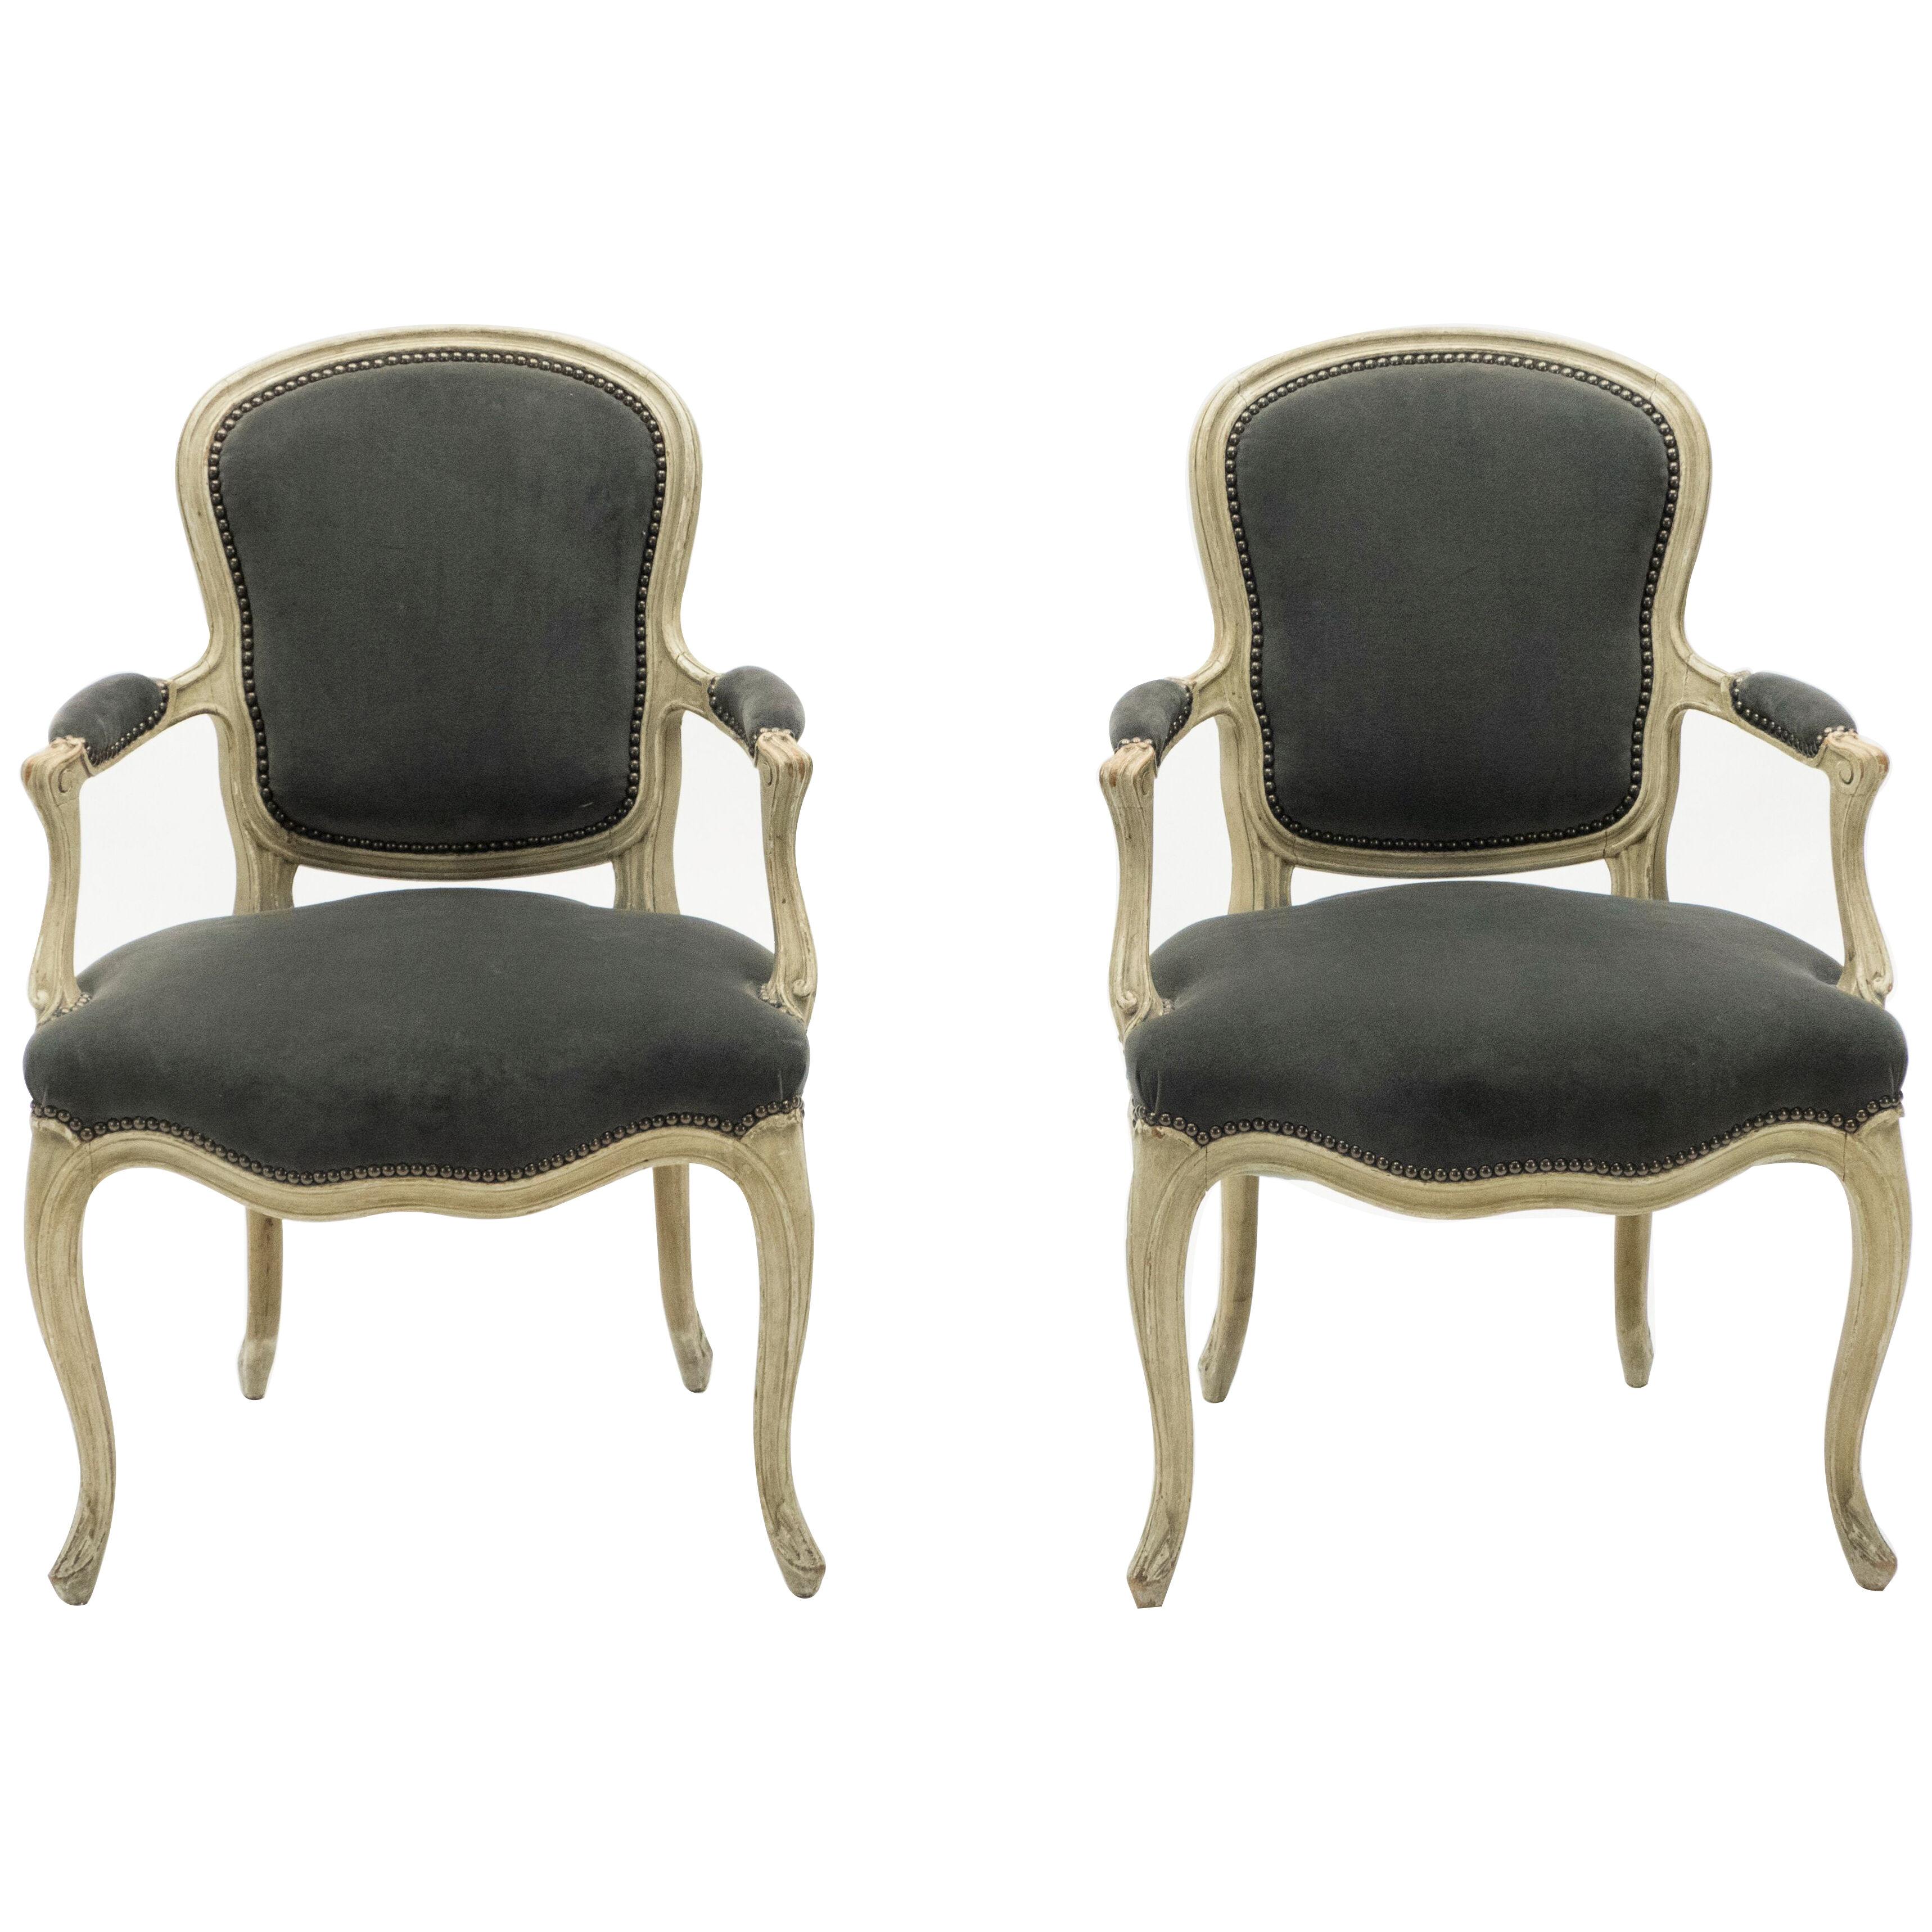 Rare Pair of Stamped Maison Jansen Louis XV Neoclassical Armchairs, 1940s